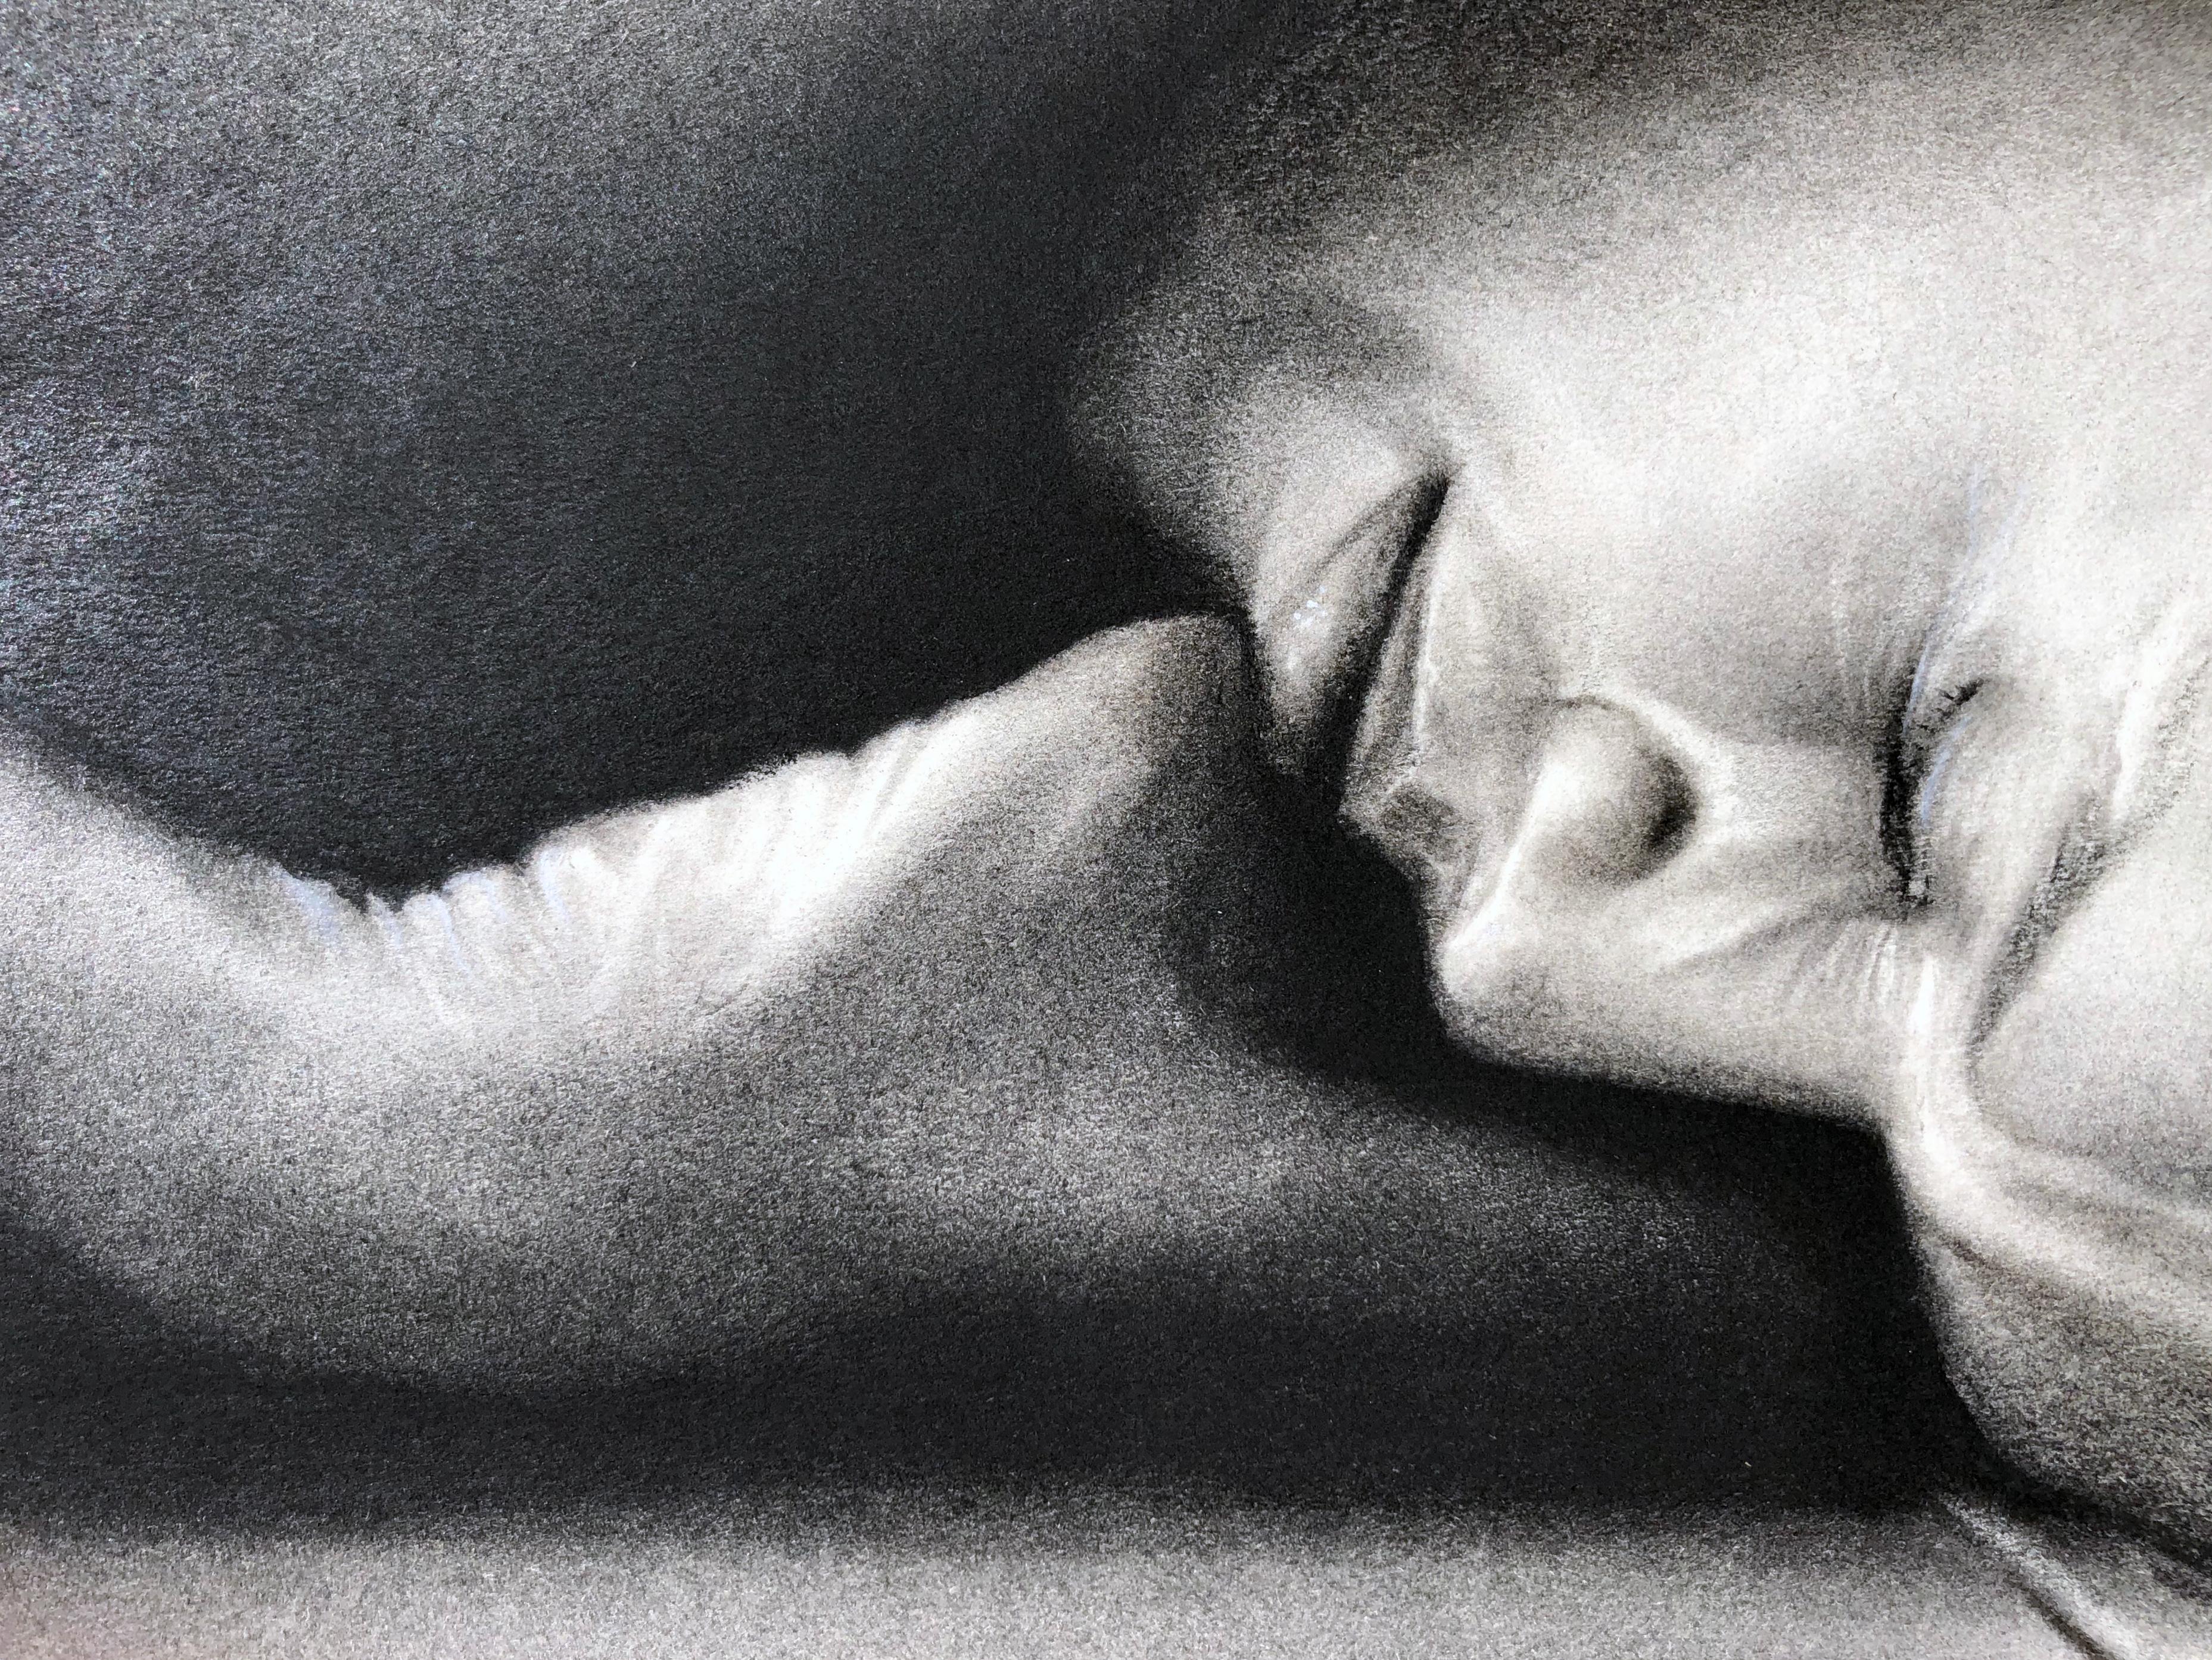 Sleeping Man, Nude Male Figure Curled on the Floor, Charcoal Drawing - Contemporary Art by Shuta Ruelas